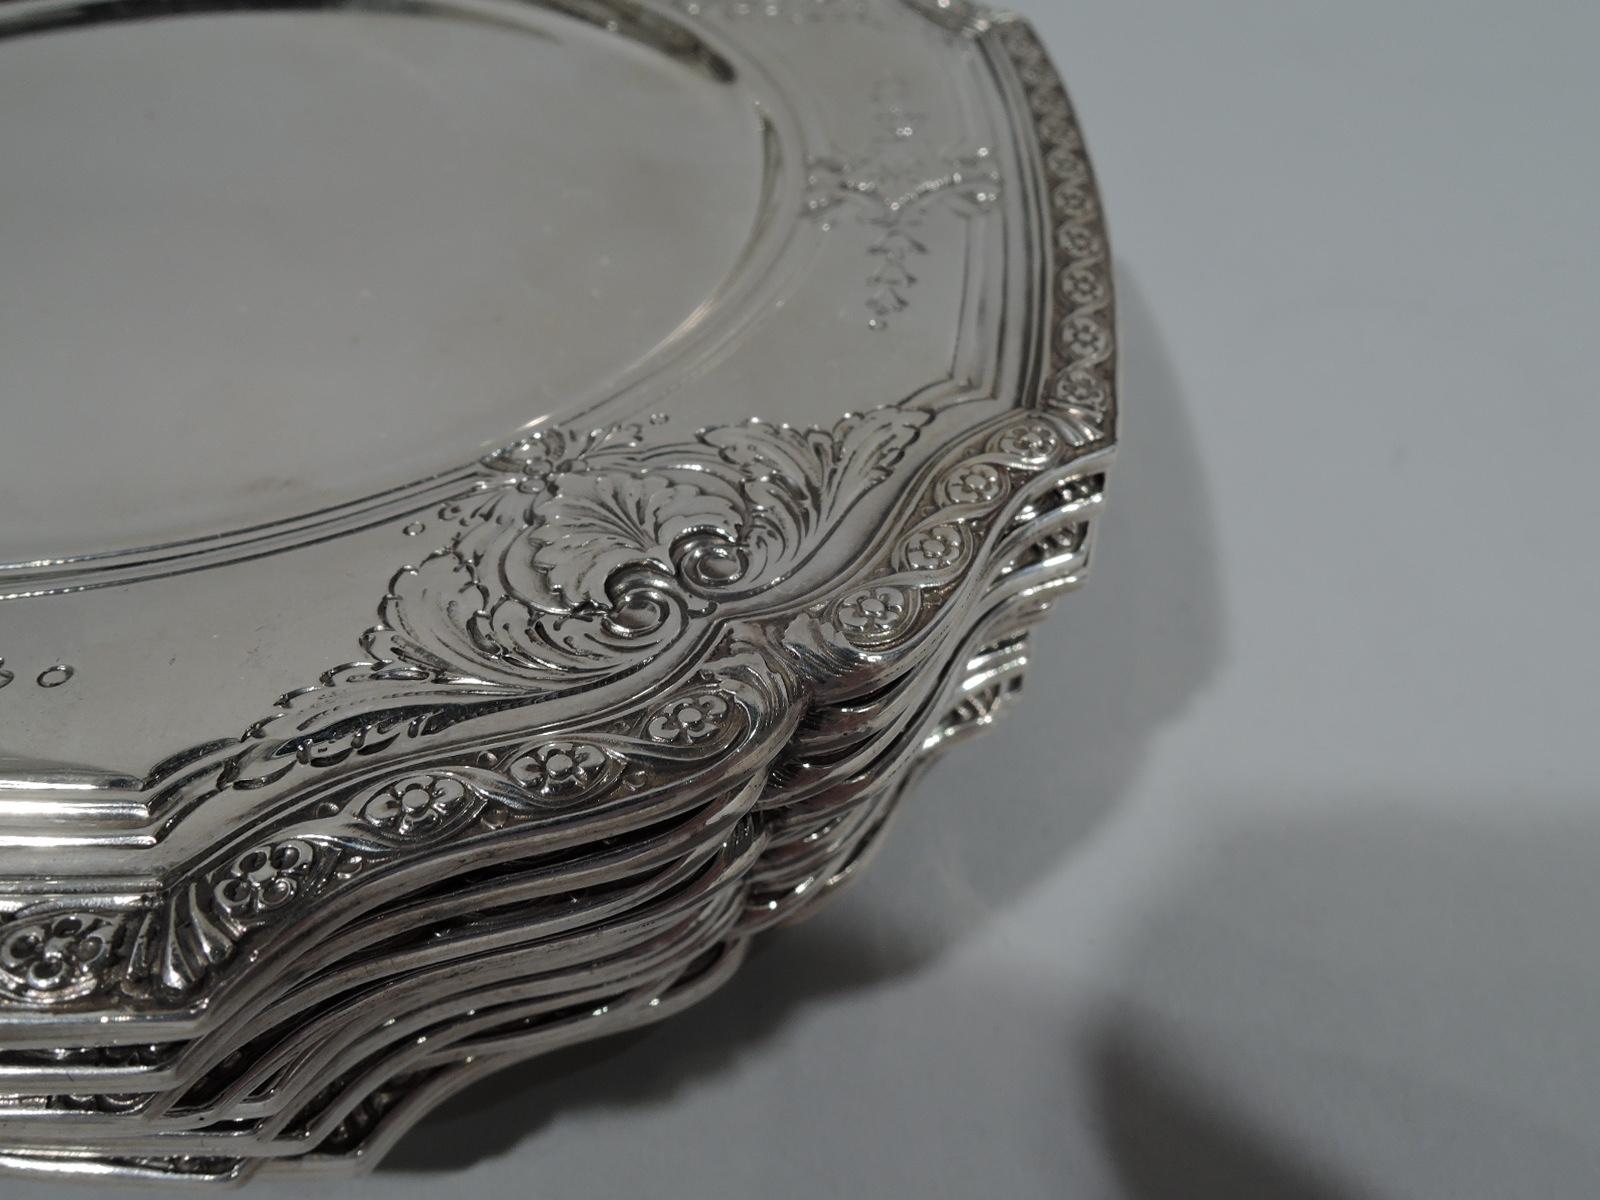 American Antique Tiffany & Co. Edwardian Sterling Silver Bread and Butter Plates